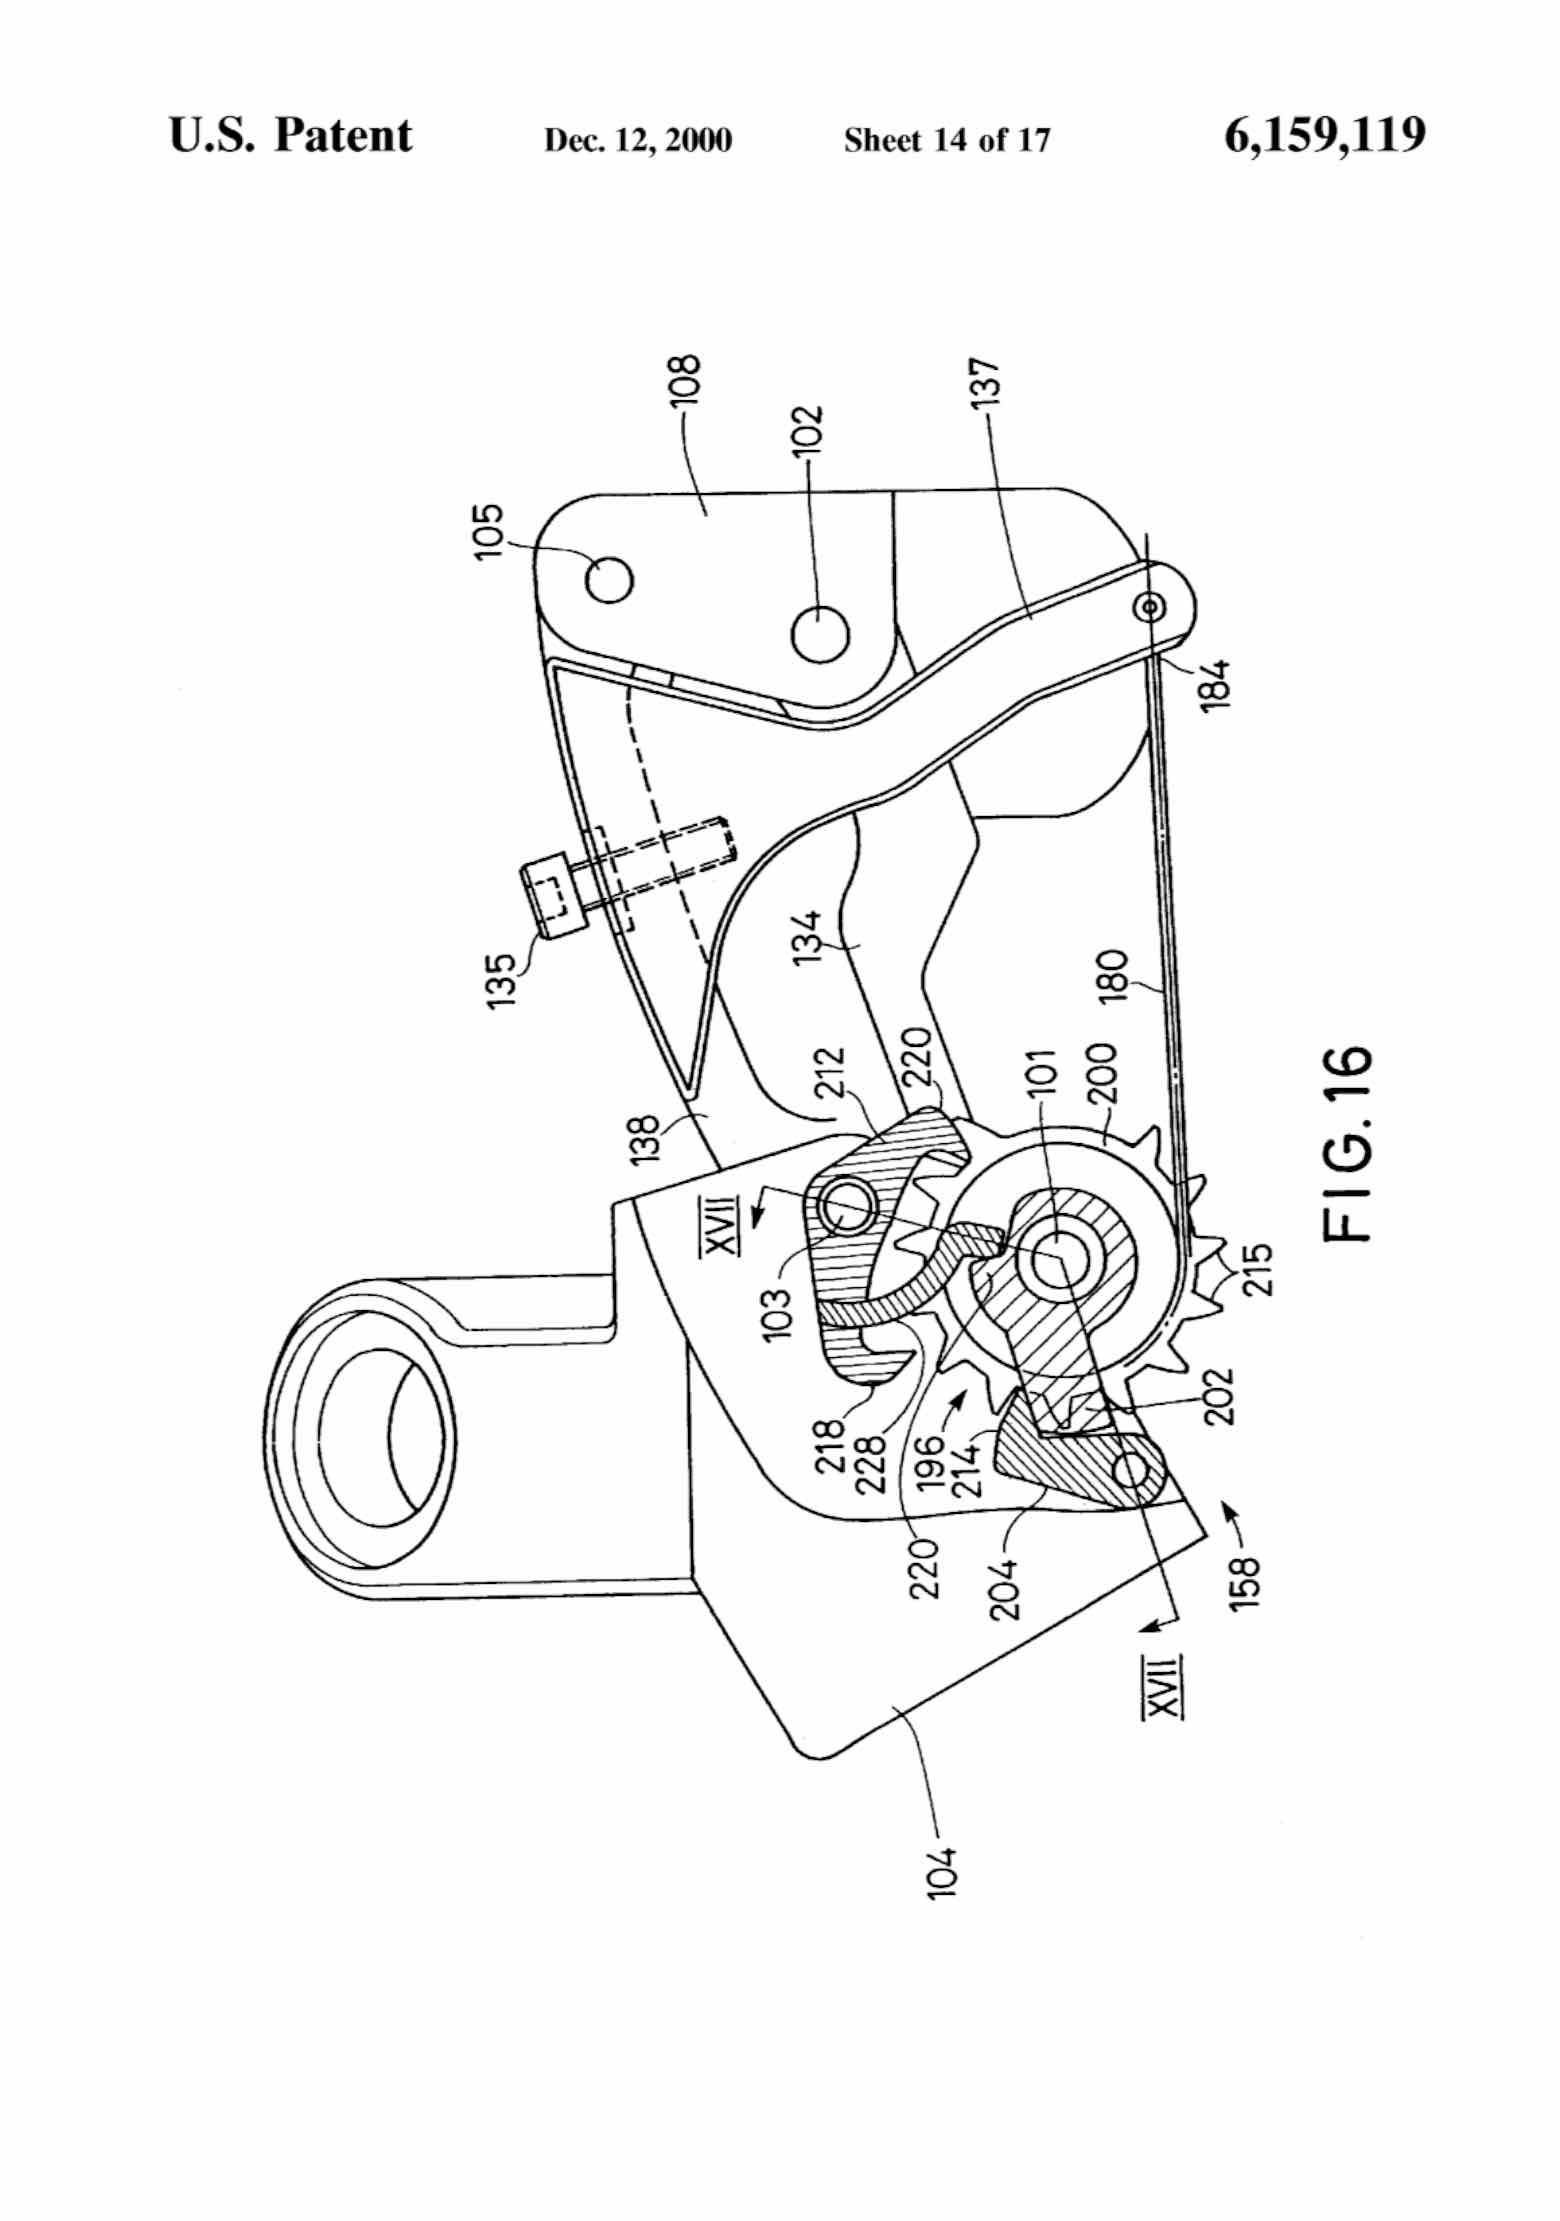 US Patent 6,159,119 - Shimano AirLines scan 15 main image